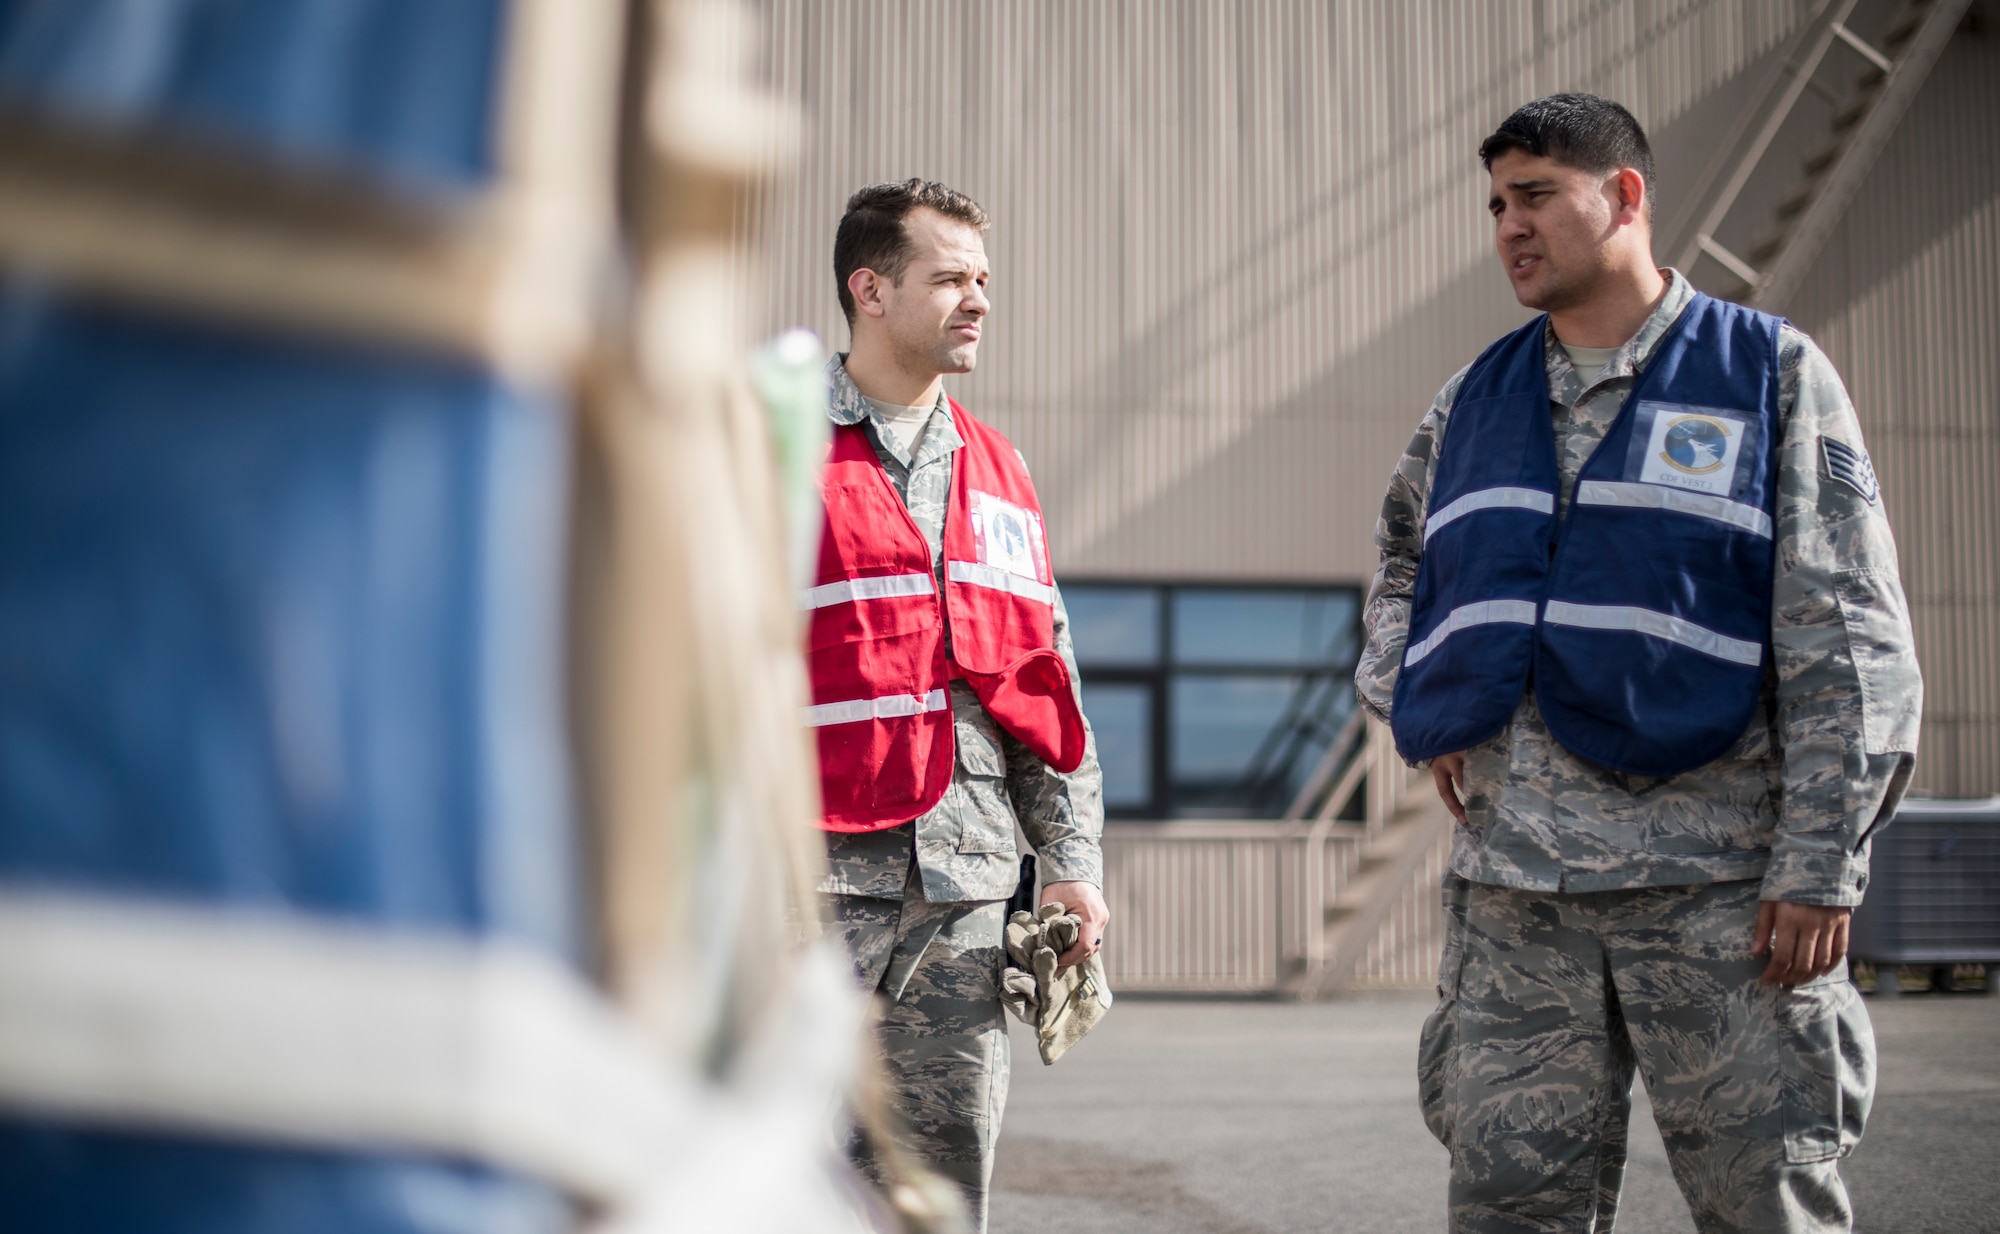 Staff Sgt. Russel Prusinski, 92nd Logistics Readiness Squadron Traffic Management Office, and Staff Sgt. Joseph Needham, 92nd LRS commander’s administrative assistant, discuss a cargo move during an exercise at Fairchild Air Force Base, Washington, May 2, 2018. Team Fairchild practiced their ability to perform during contingency operations, April 30 through May 11, giving personnel the hands-on experience needed to effectively deploy Airmen and assets downrange at a moment’s notice. (U.S. Air Force Photo/Senior Airman Sean Campbell)